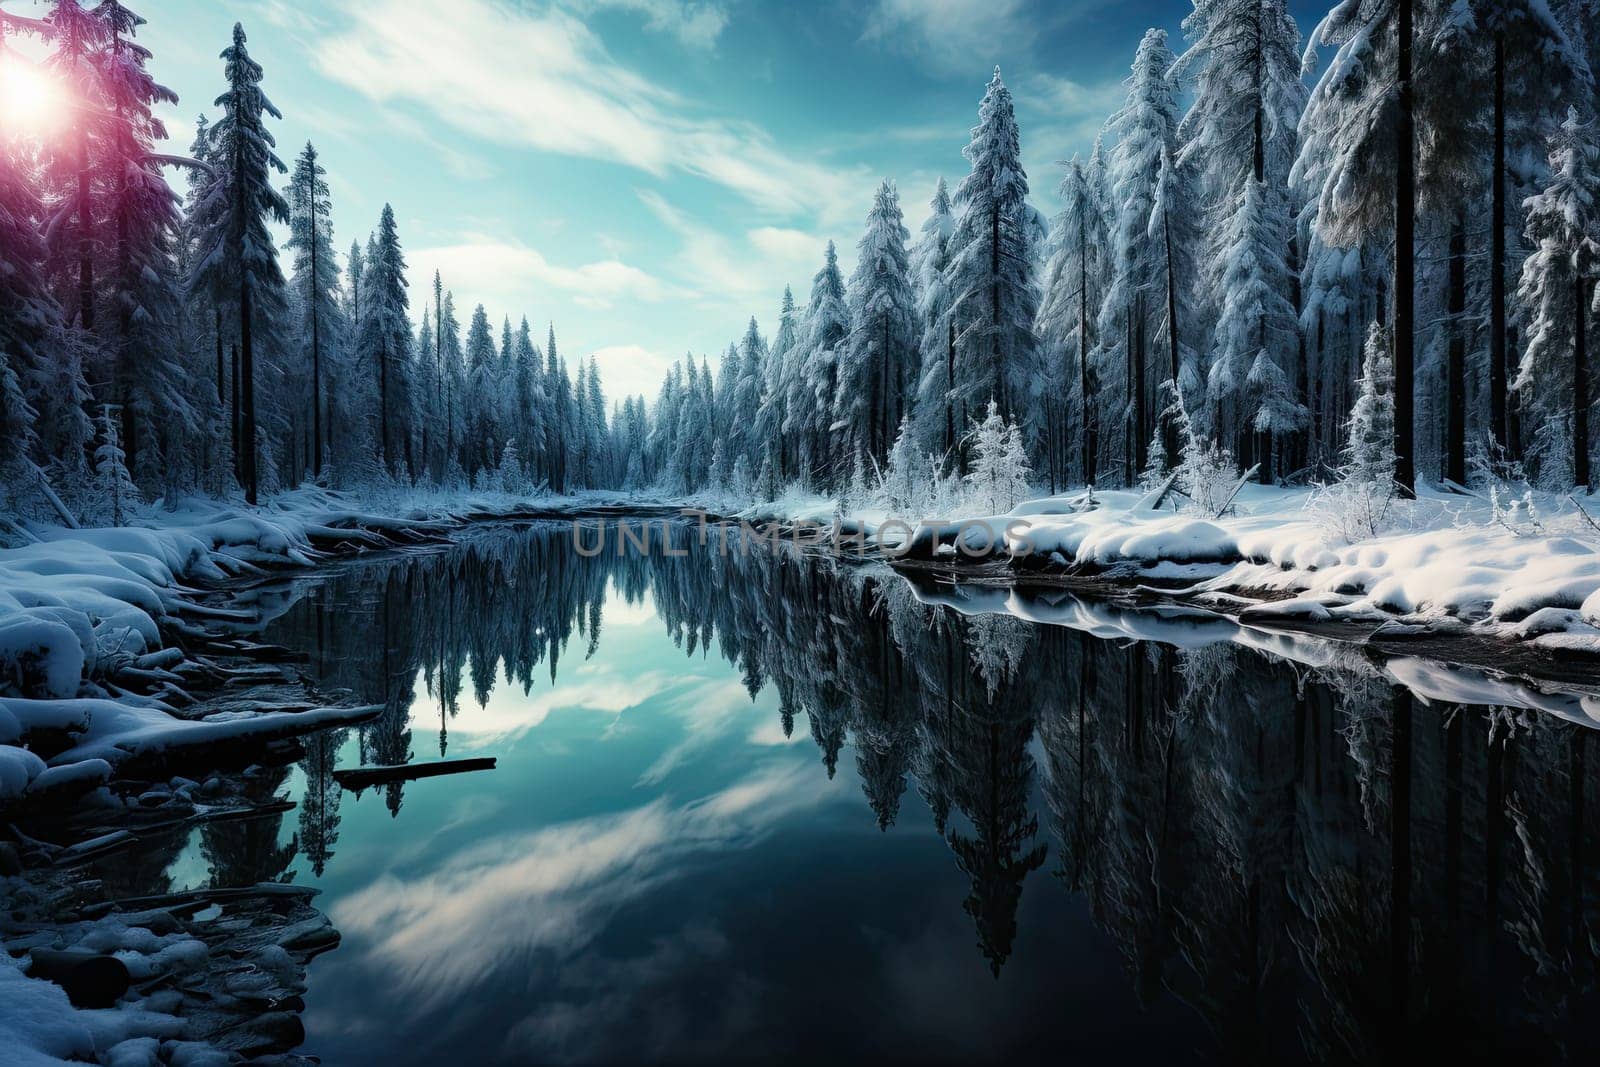 A Serene Winter Wonderland: Snowy Trees Reflecting on a Frozen Lake under a Clear Blue Sky